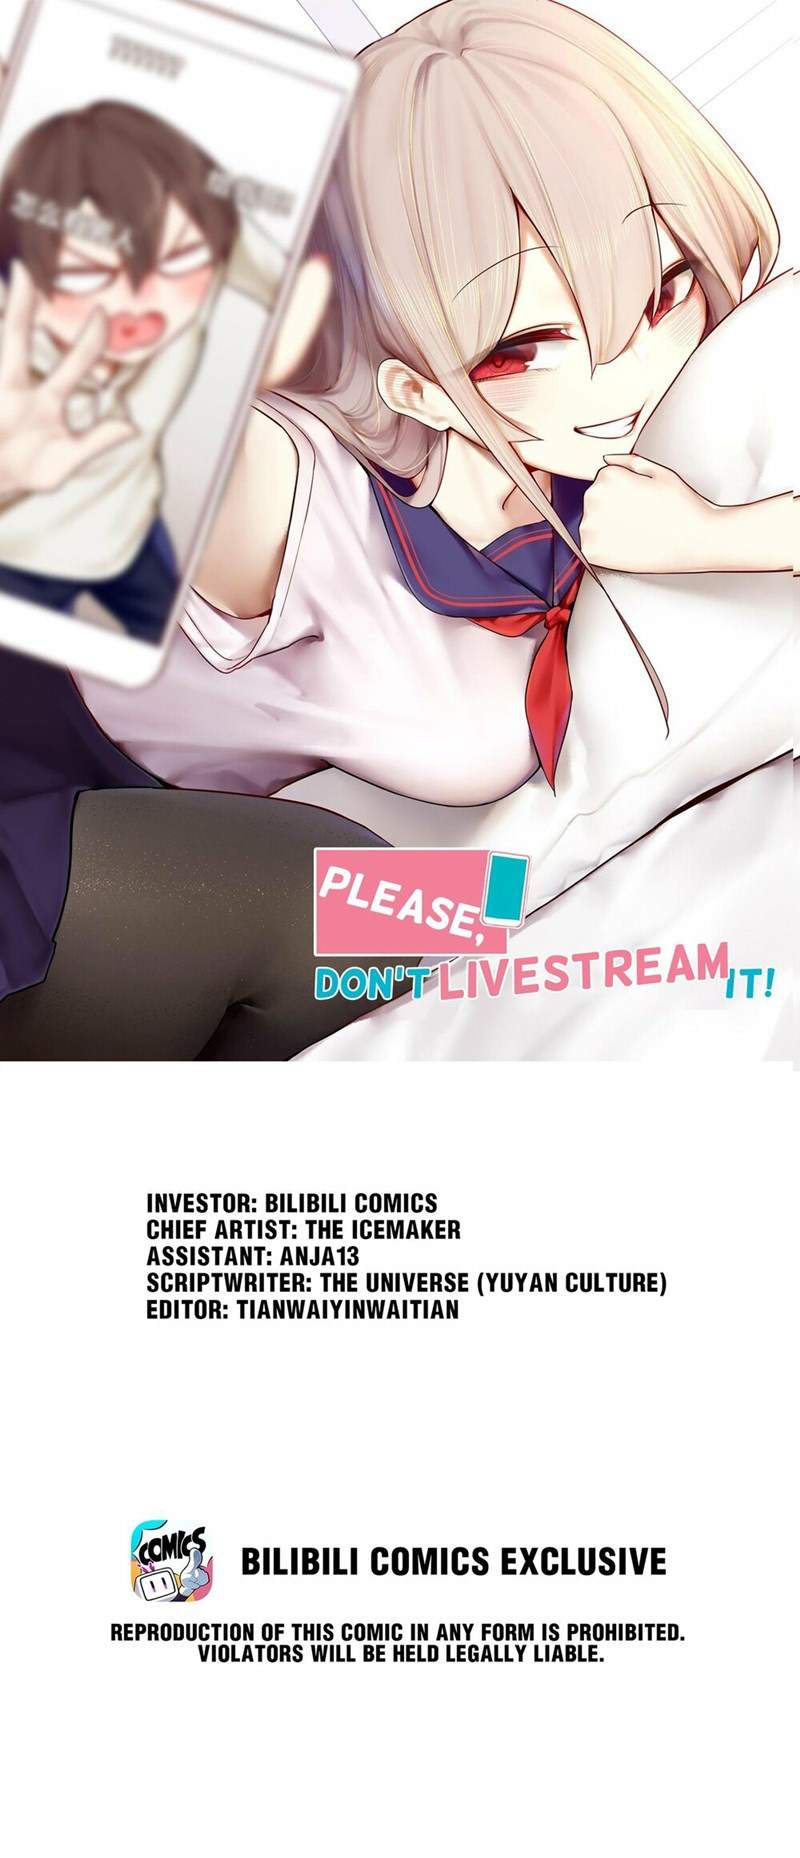 Miss, don’t livestream it! Chapter 27-1